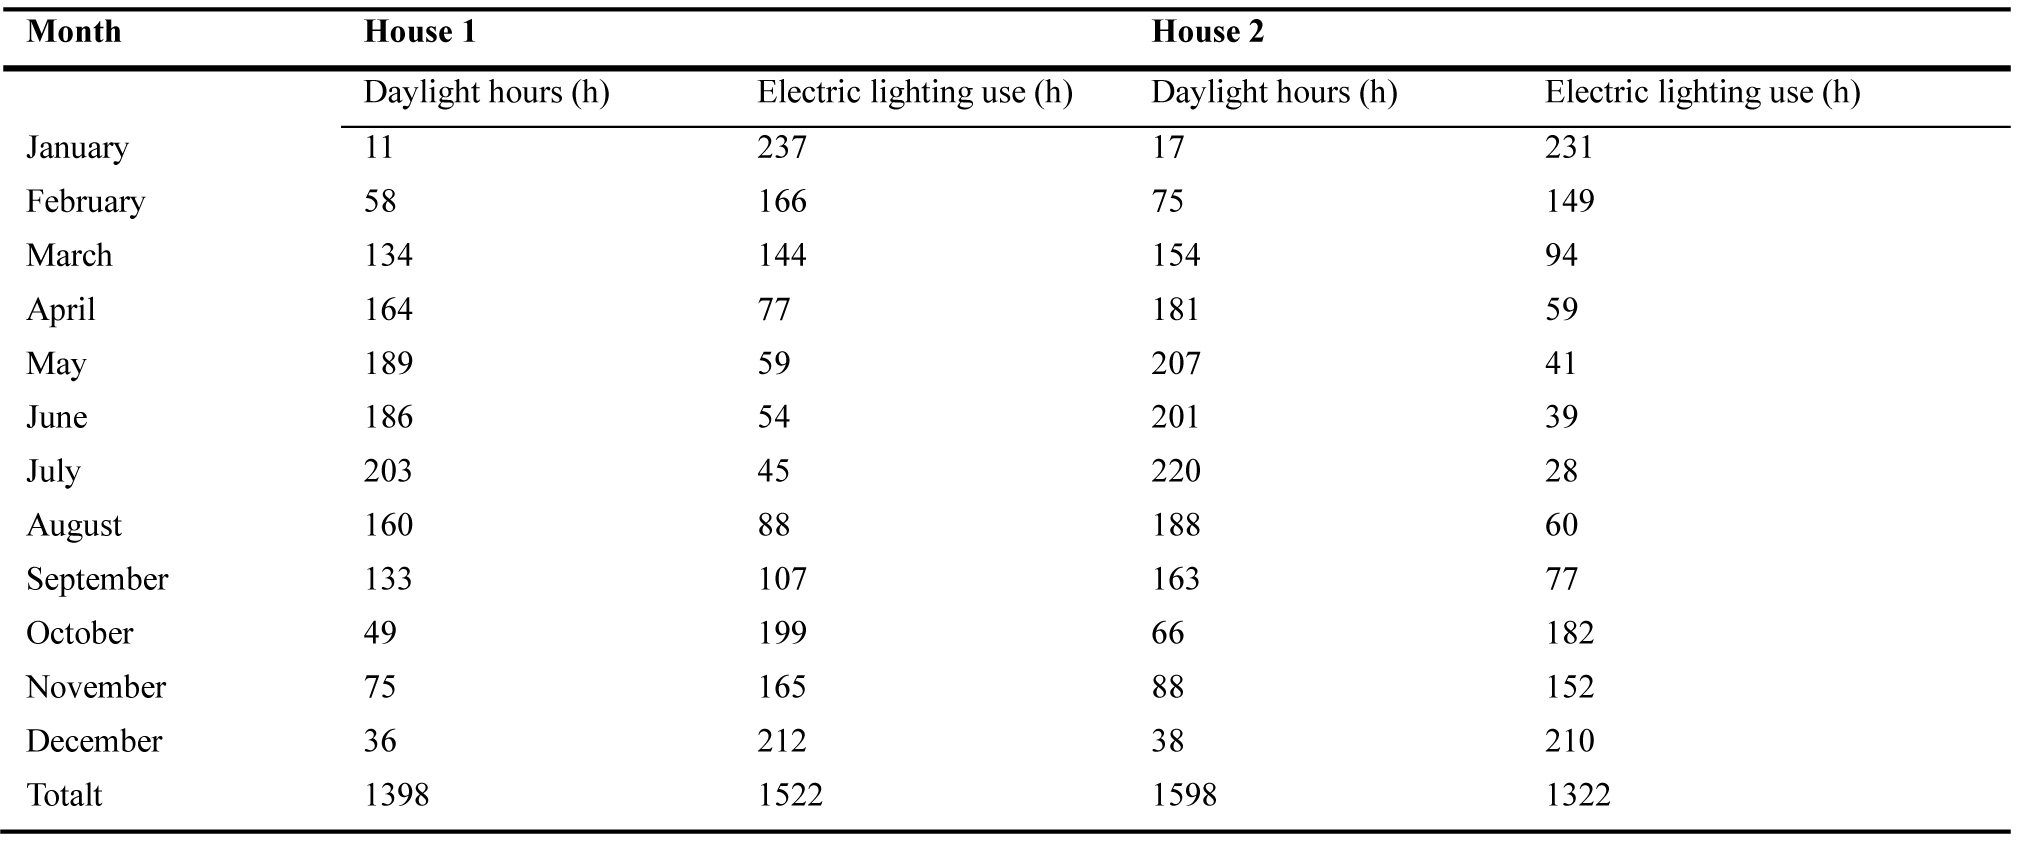 Number of daylight hours and electric lighting use hours in houses 1 and 2 for each month.